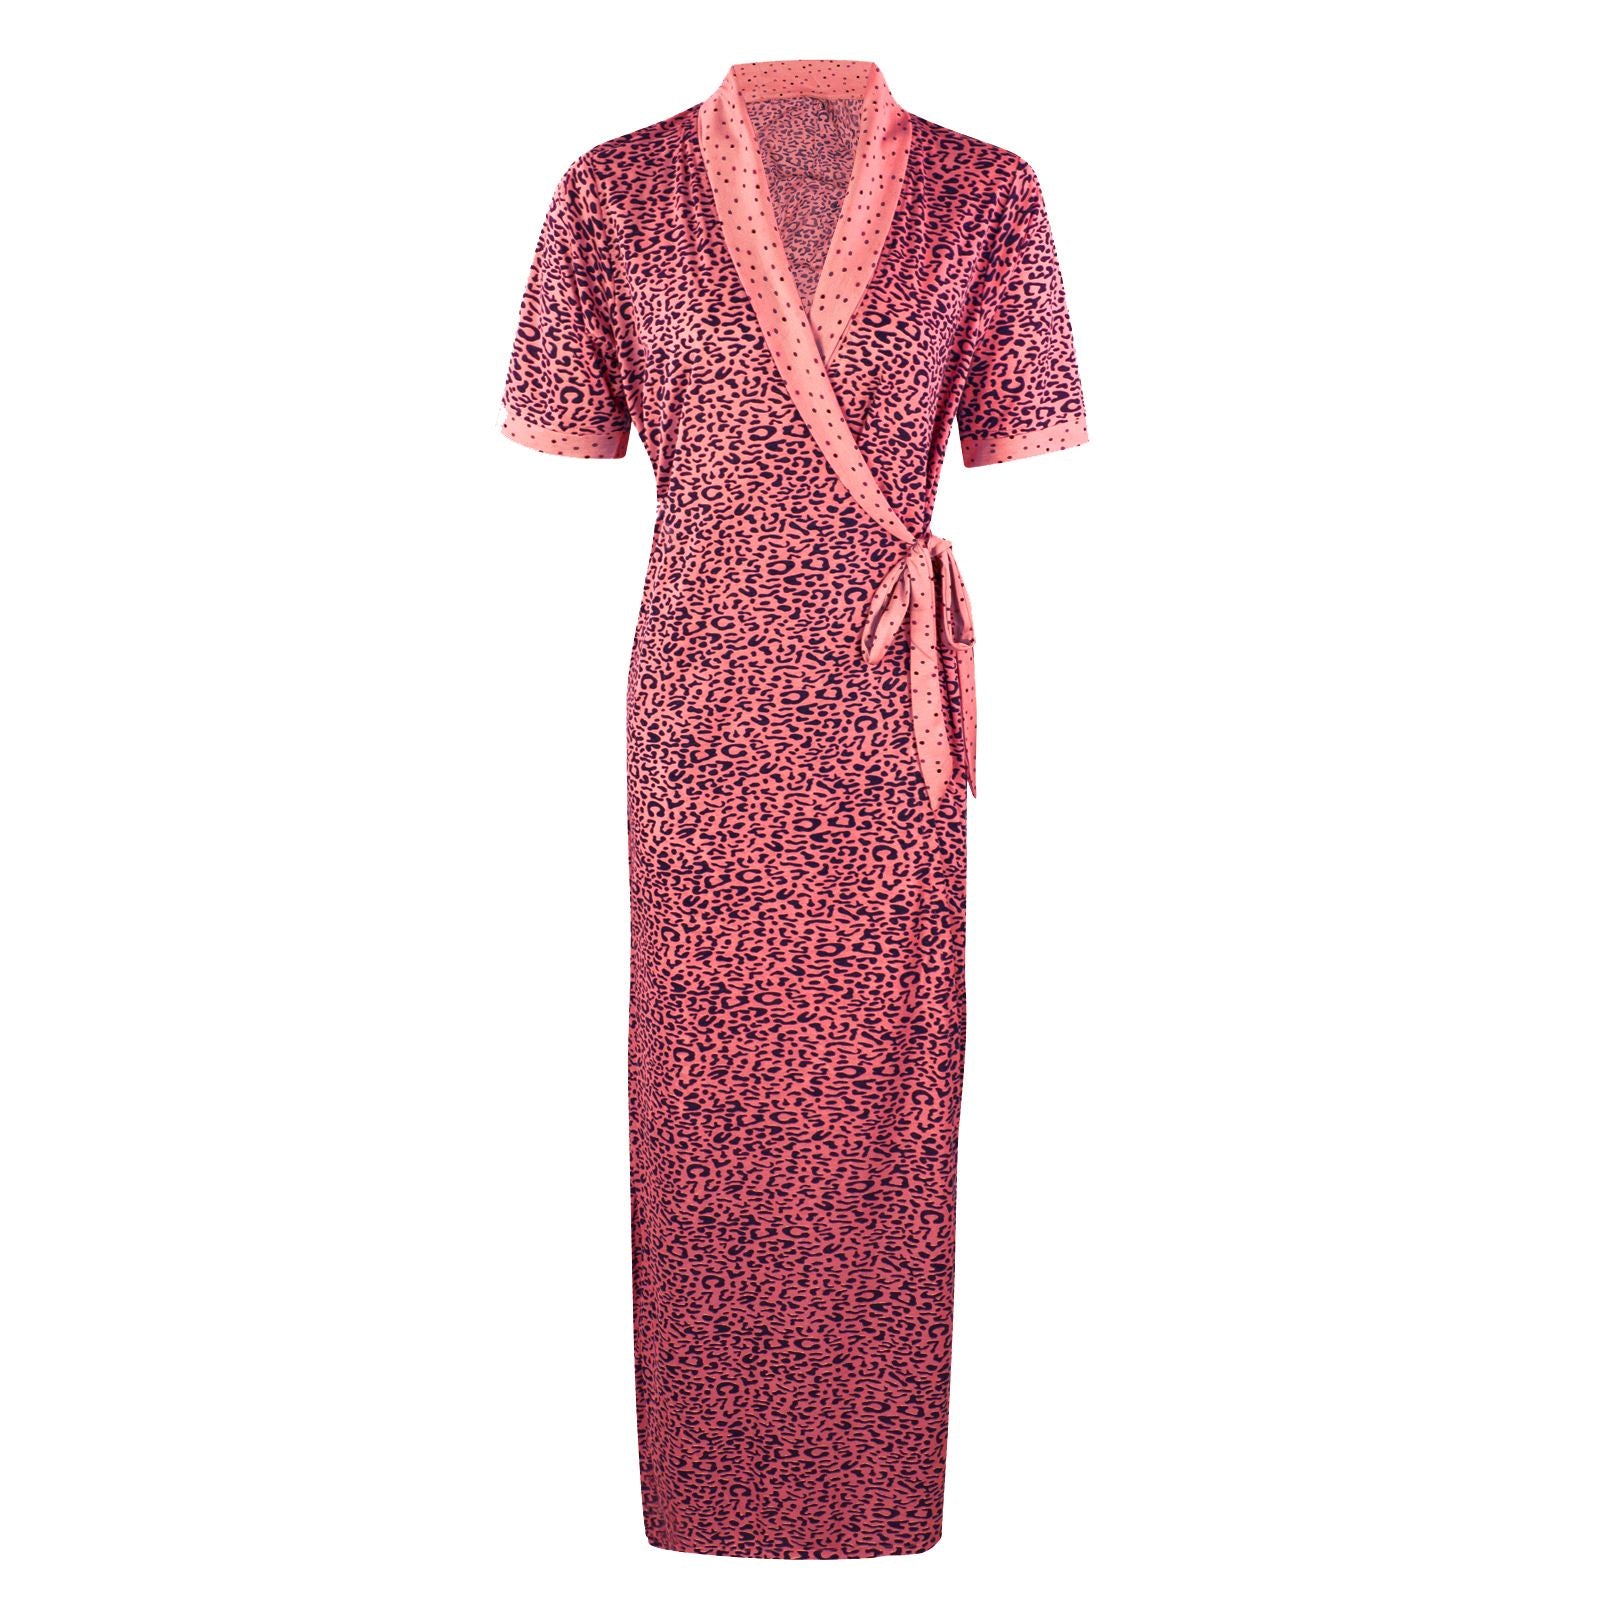 Coral / One Size Animal Print Cotton Robe / Wrap Gown The Orange Tags